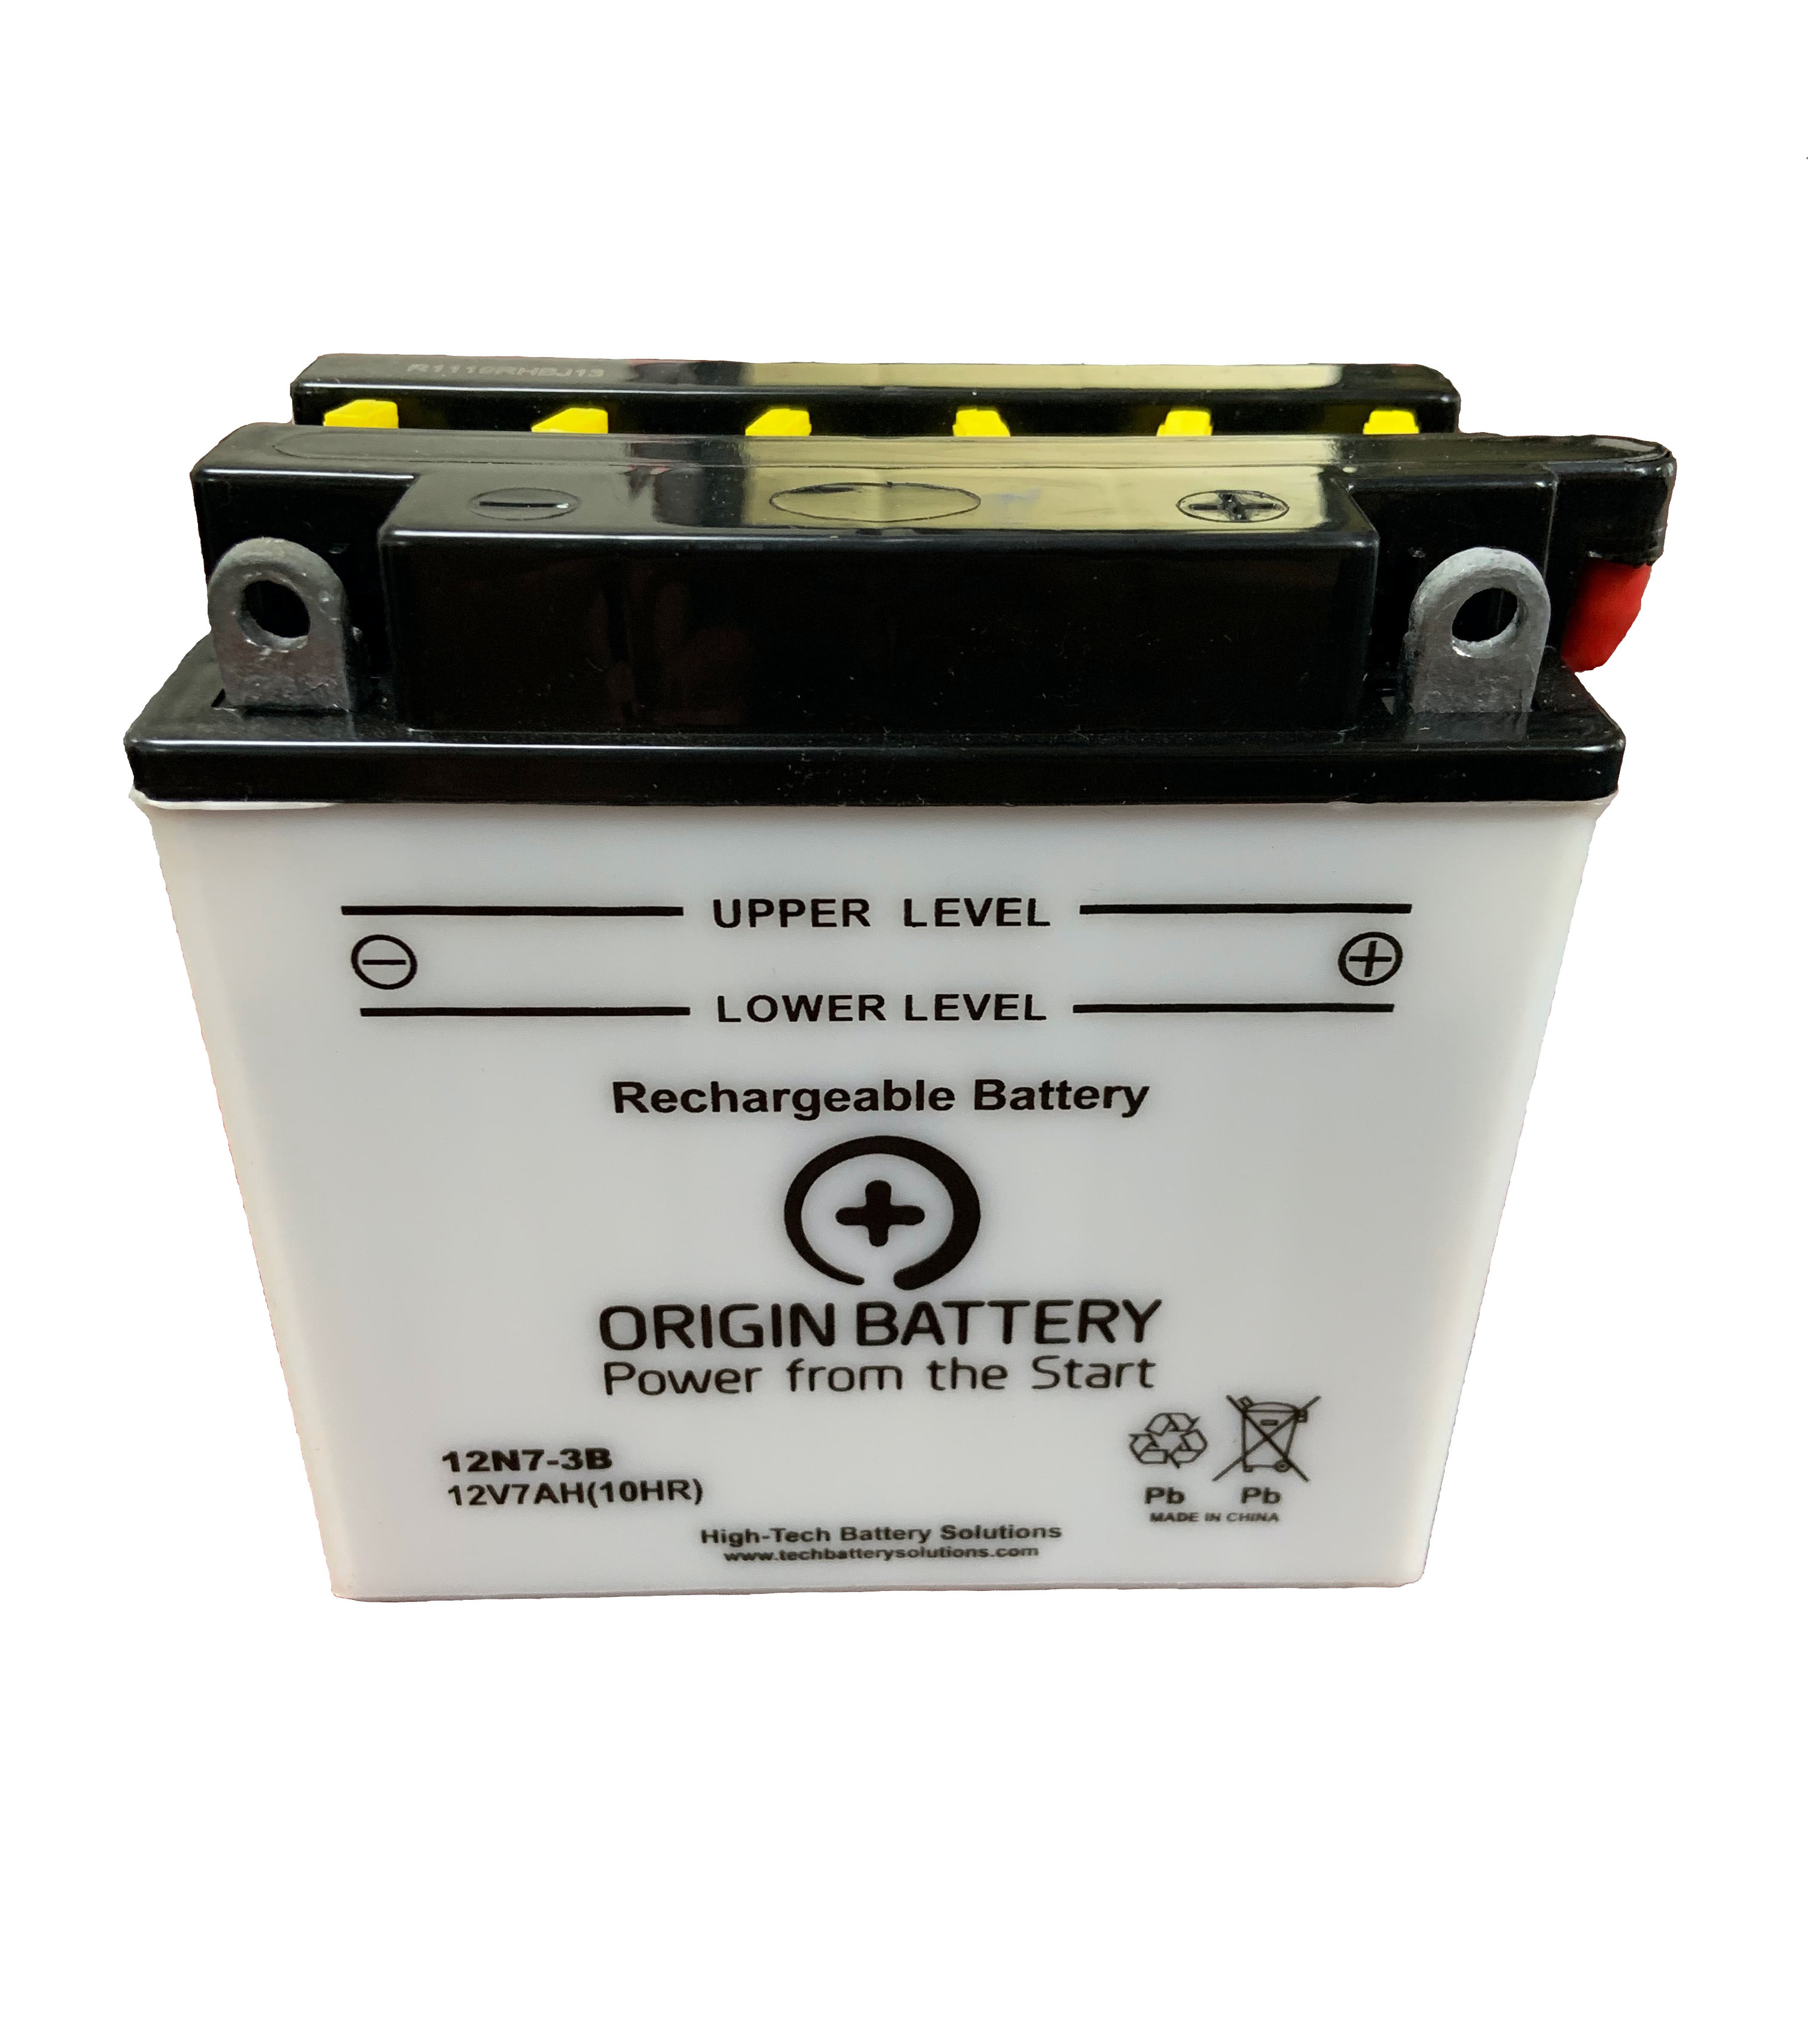 Will this battery work for a 03 yamaha 400 big bear